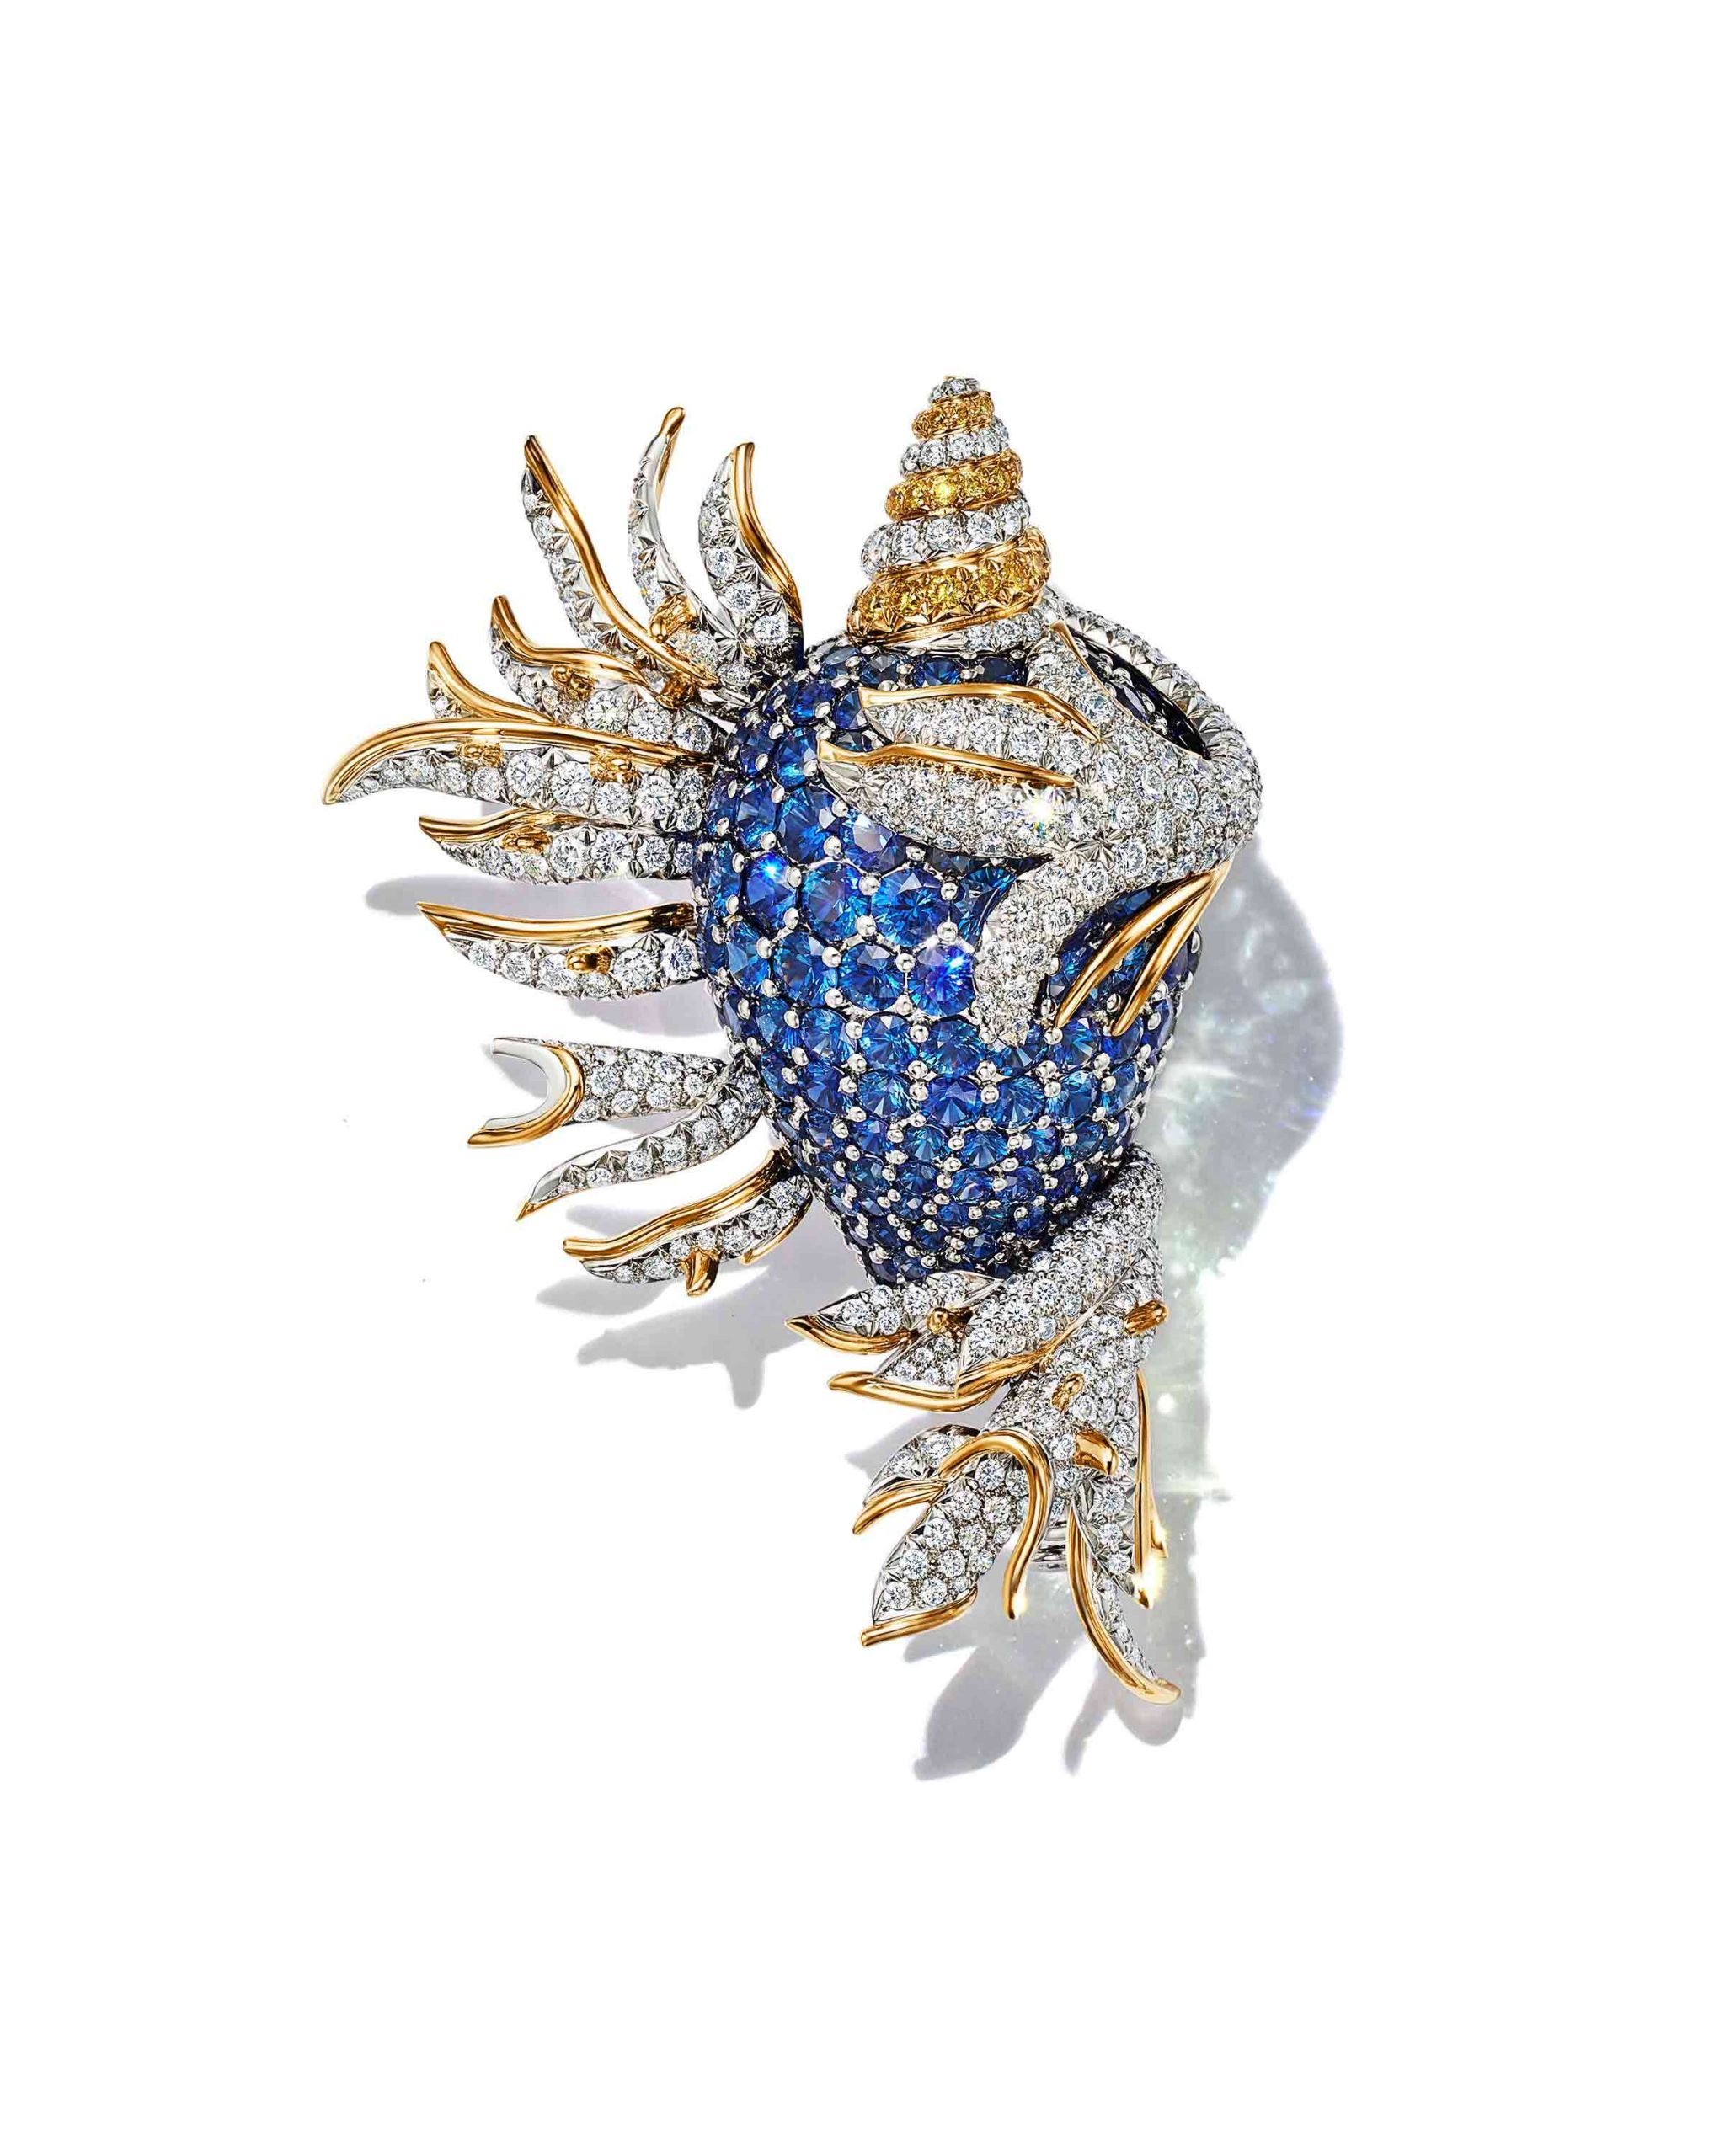 Jean Schlumberger® Coquillage clip in platinum and 18k yellow gold with round sapphires and round yellow and white diamonds